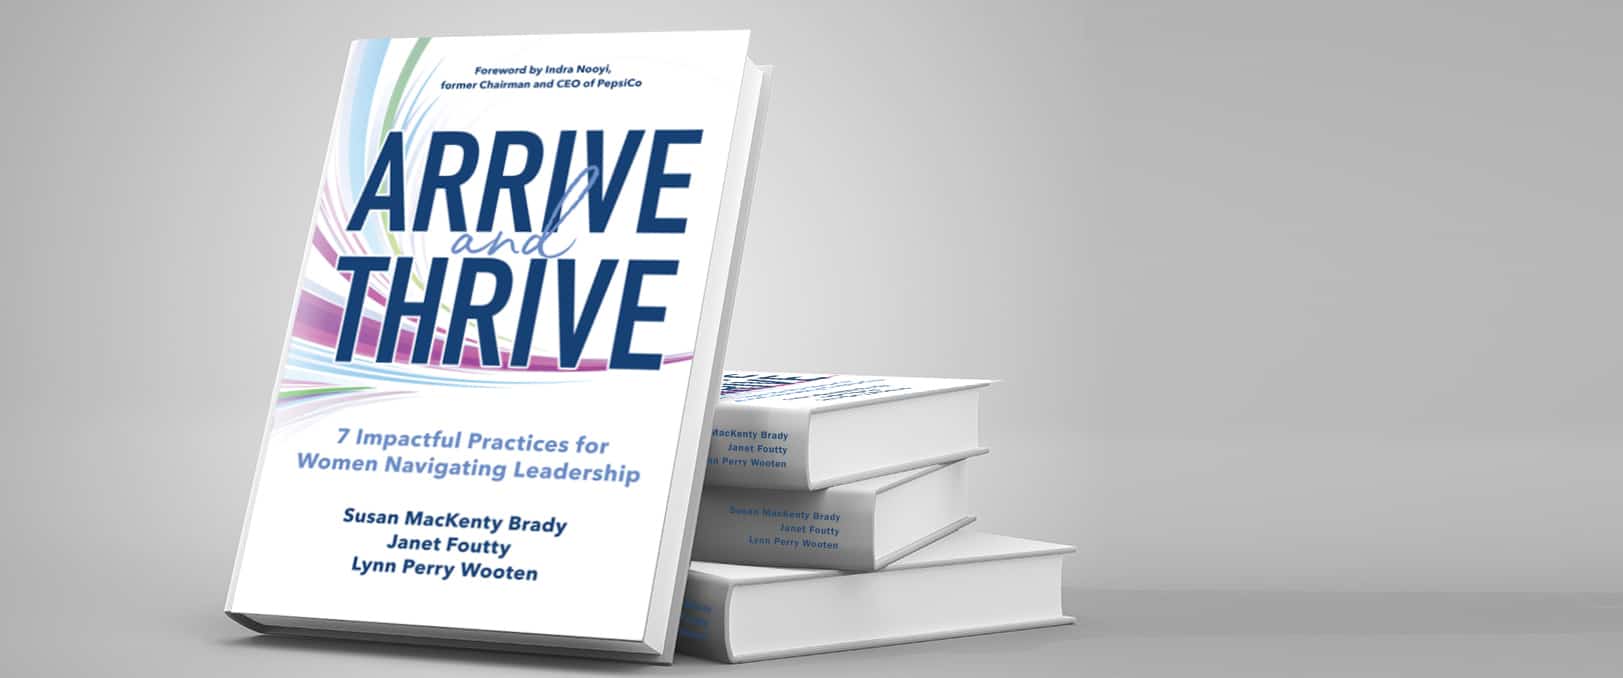 arrive and thrive stacked 3d books